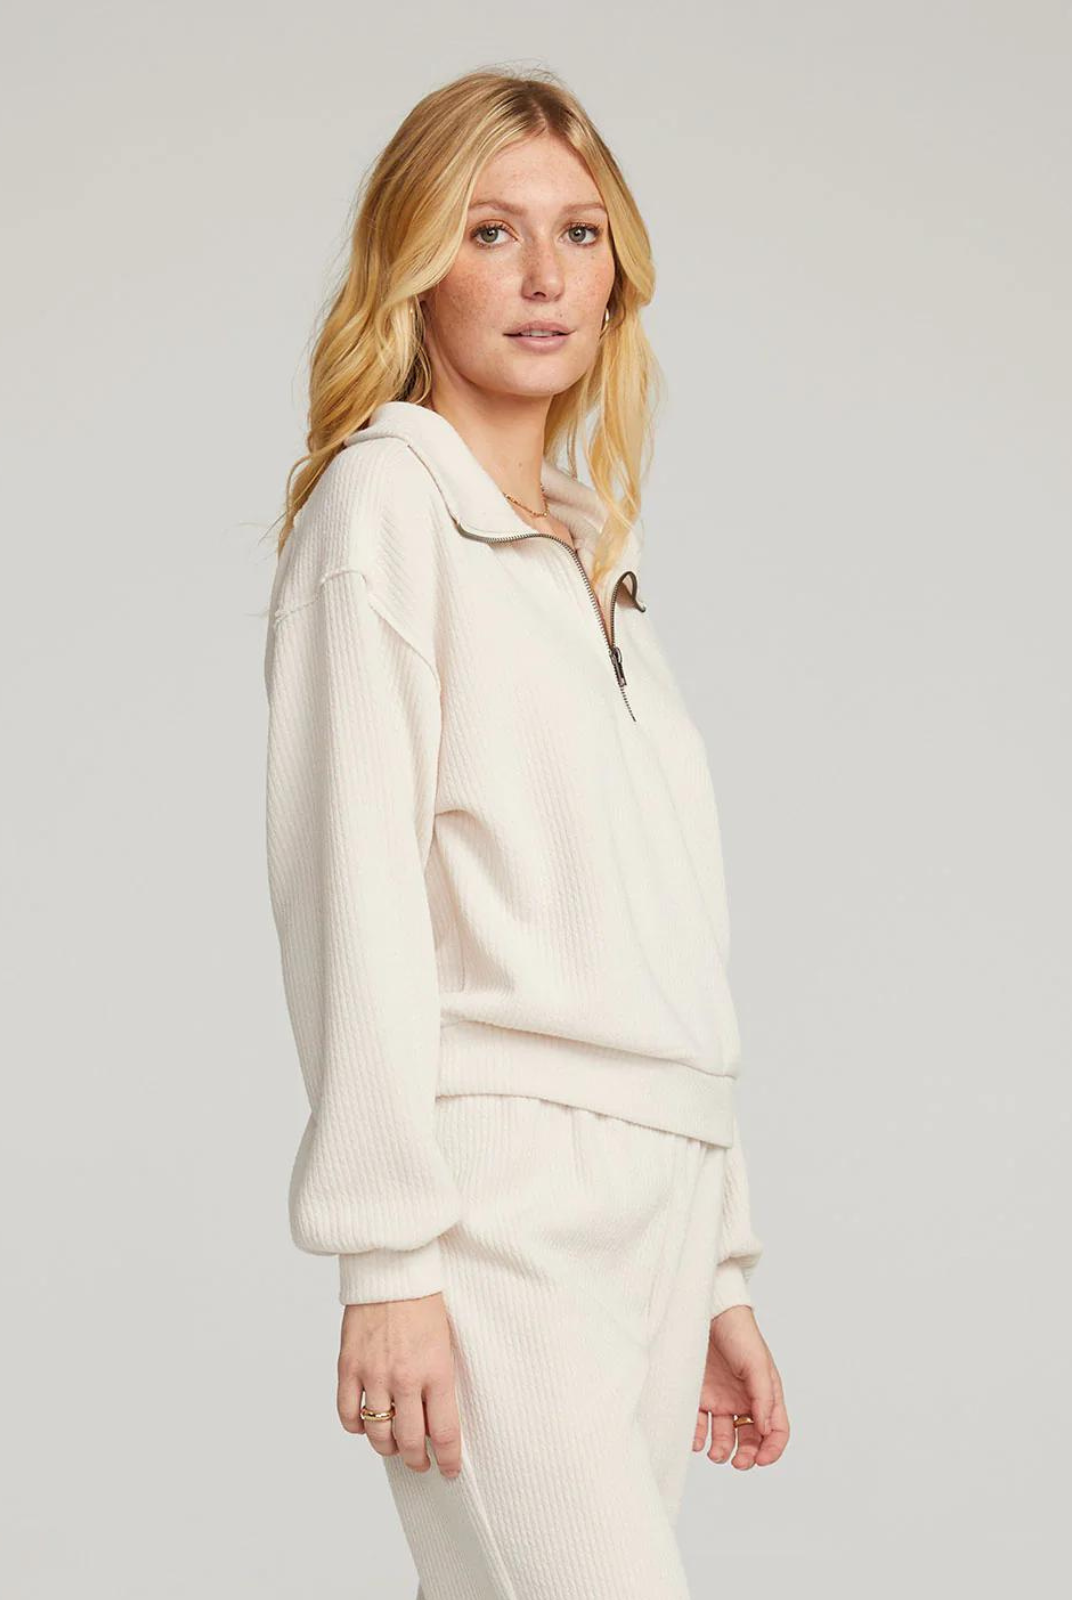 Saltwater Luxe Half Zip Pullover - Salt. Layer up and stay cozy in our salt-colored Half Zip Pullover. Designed for comfort and style, this versatile piece can be worn with anything.